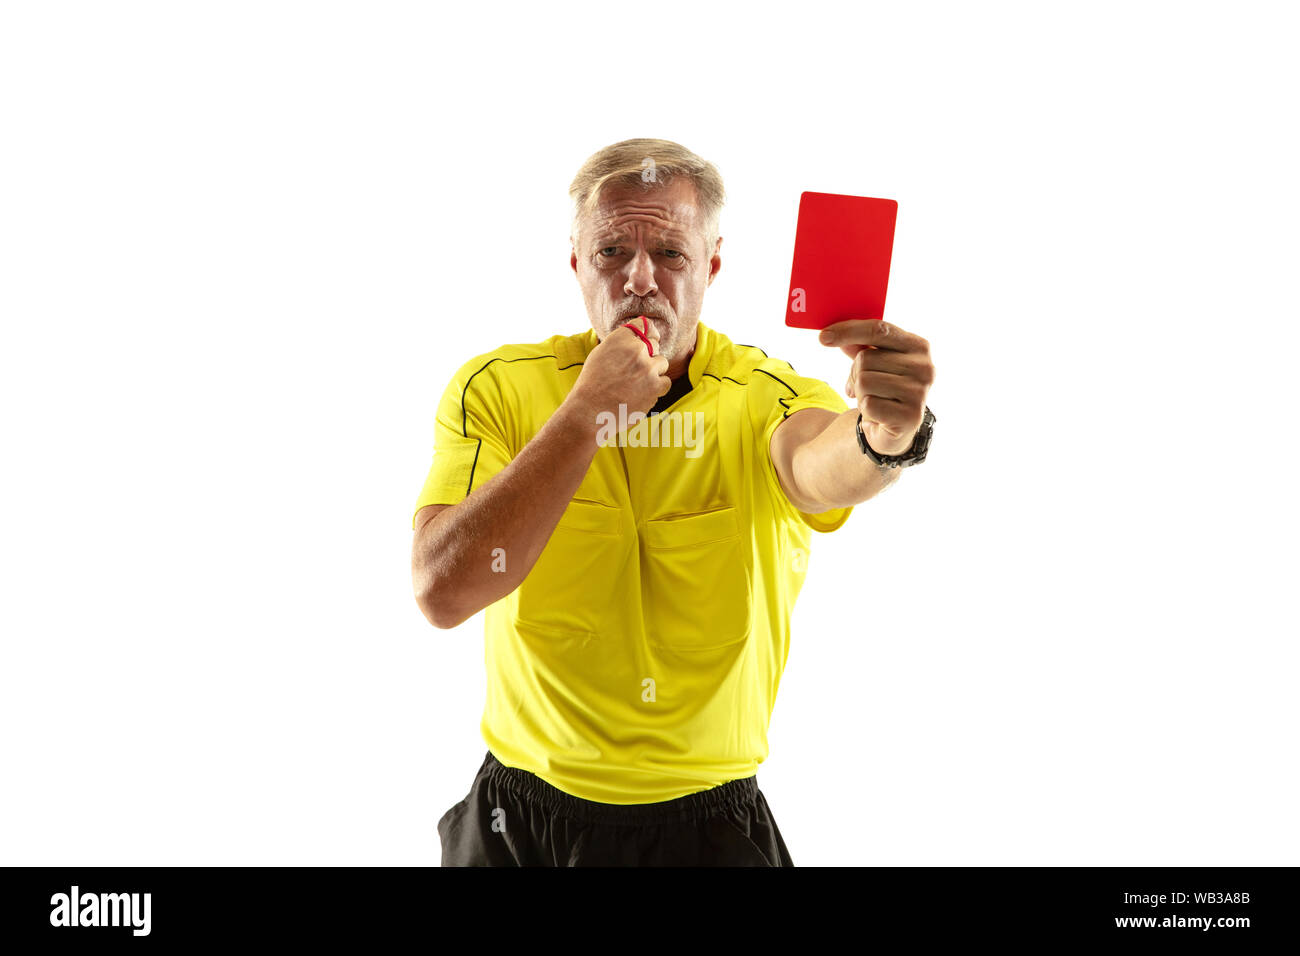 referee showing a red card to a displeased football or soccer player while gaming isolated on white studio background concept of sport rules violation controversial issues obstacles overcoming WB3A8B